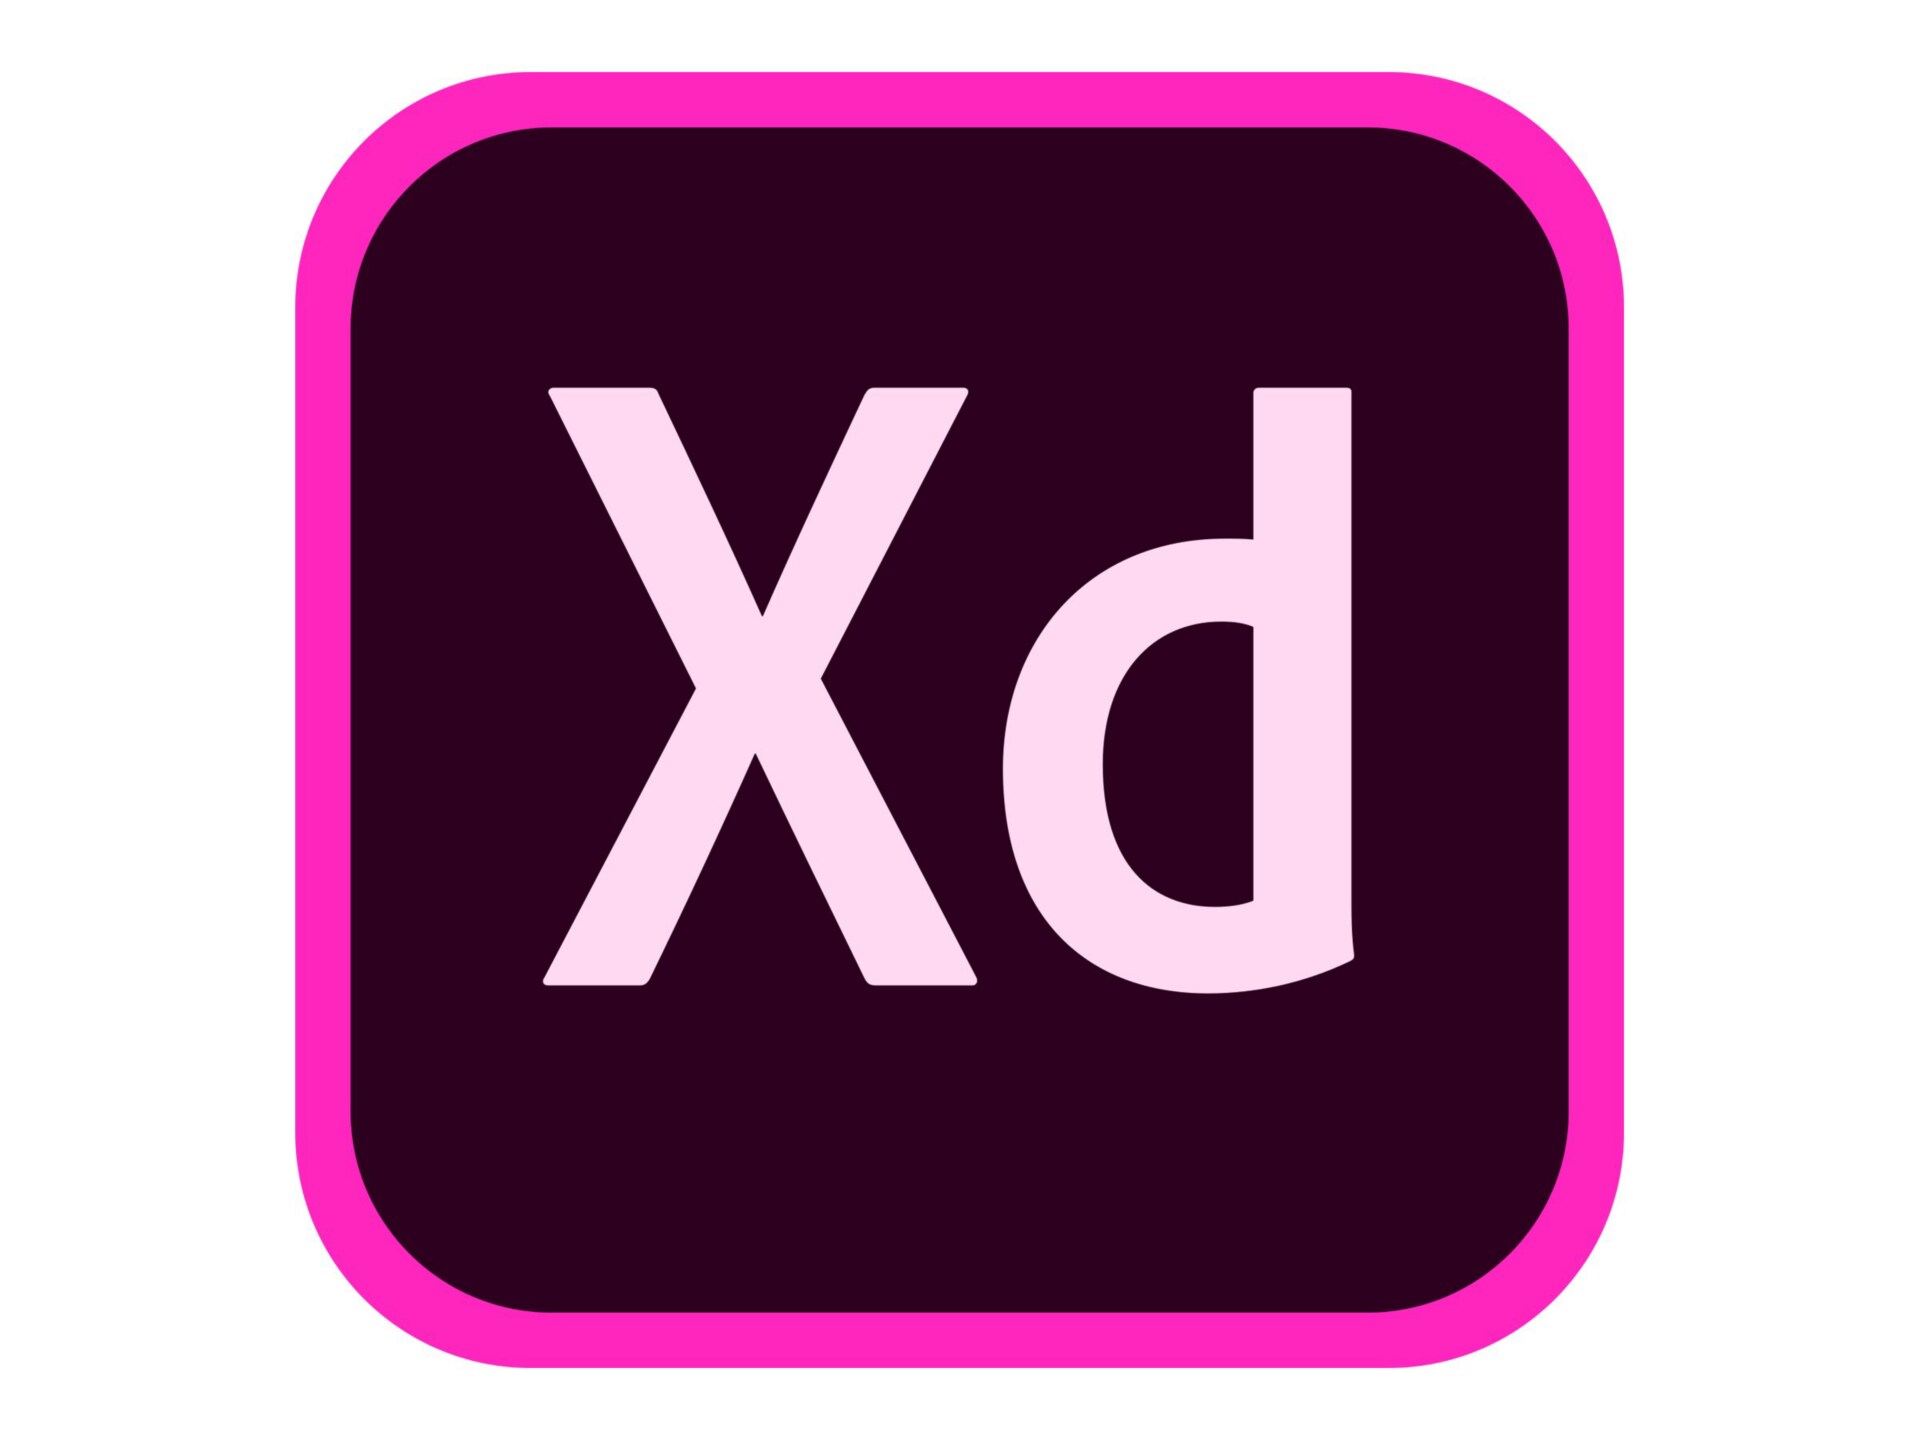 Adobe XD CC for Teams - Subscription New (34 months) - 1 user